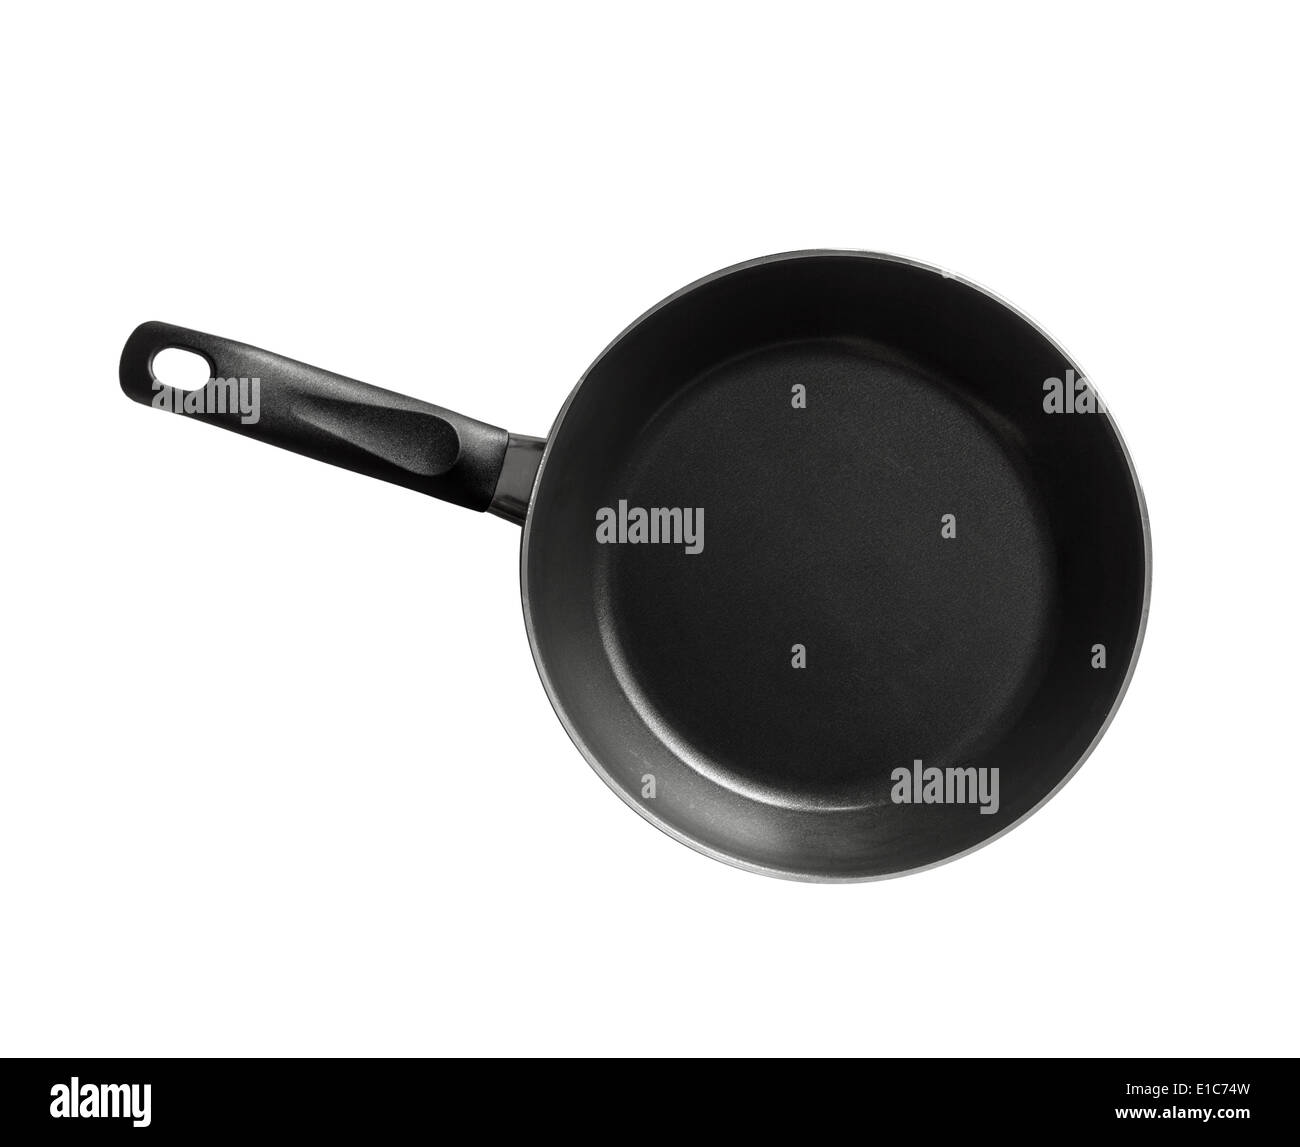 Modern black frying pan isolated on white background Stock Photo